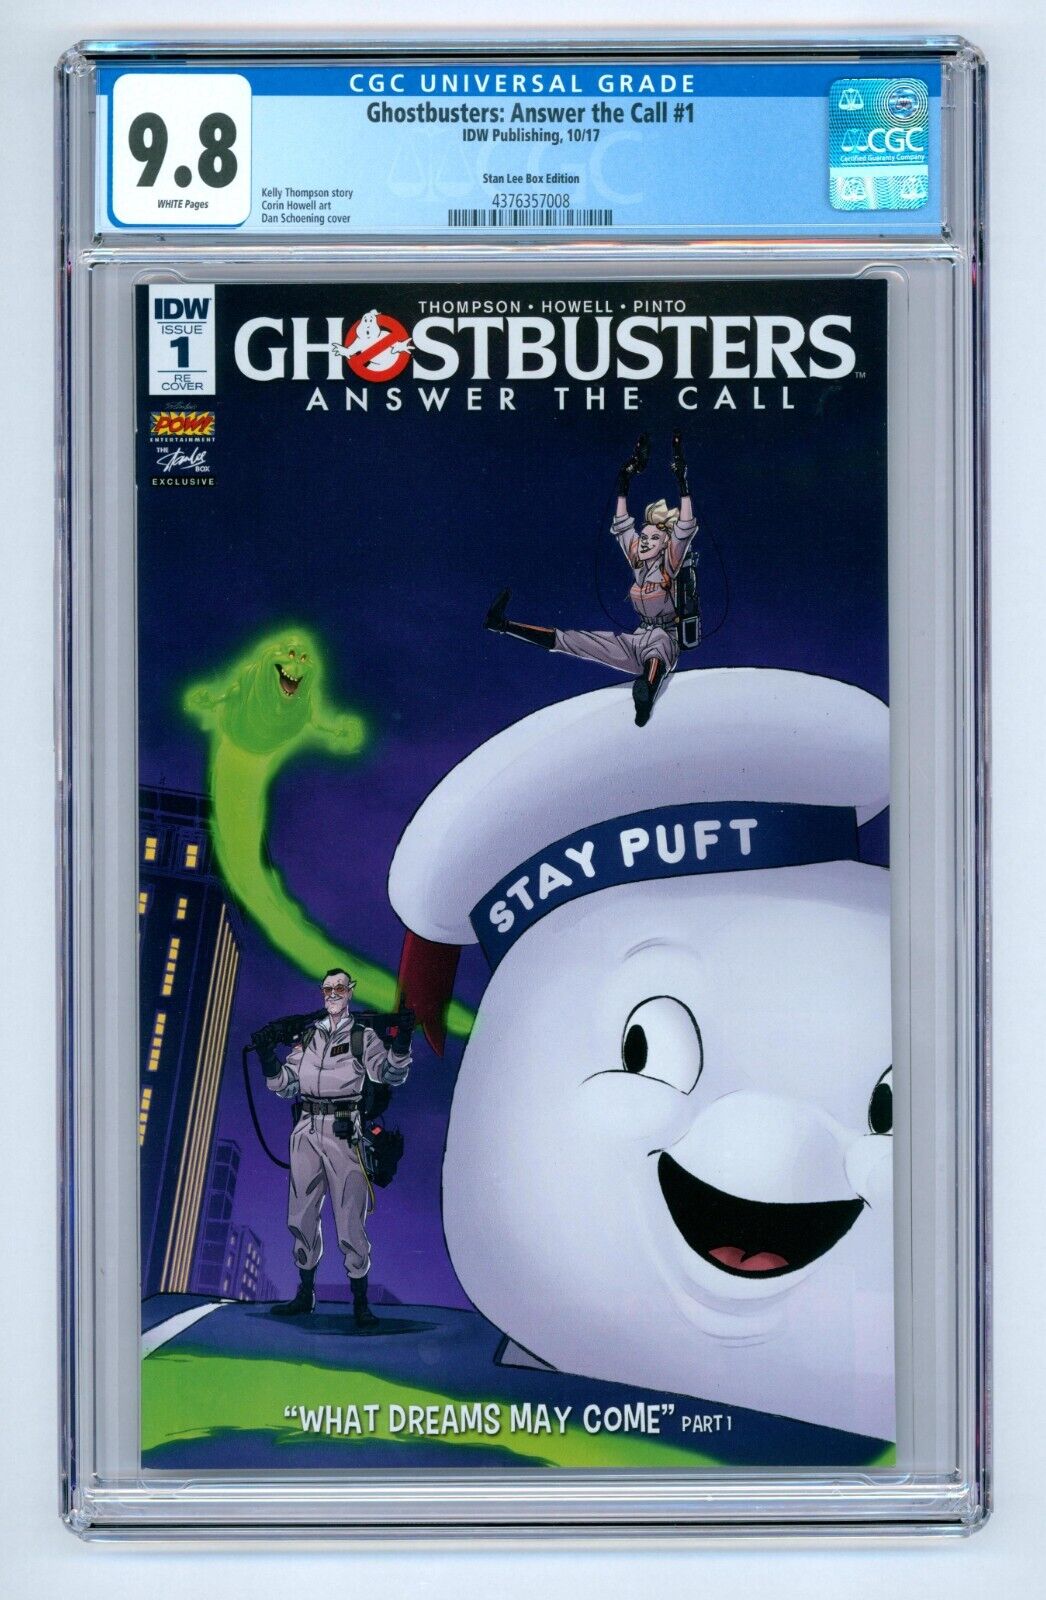 Ghostbusters: Answer the Call #1 CGC 9.8 (2017) - Stan Lee Box Edition